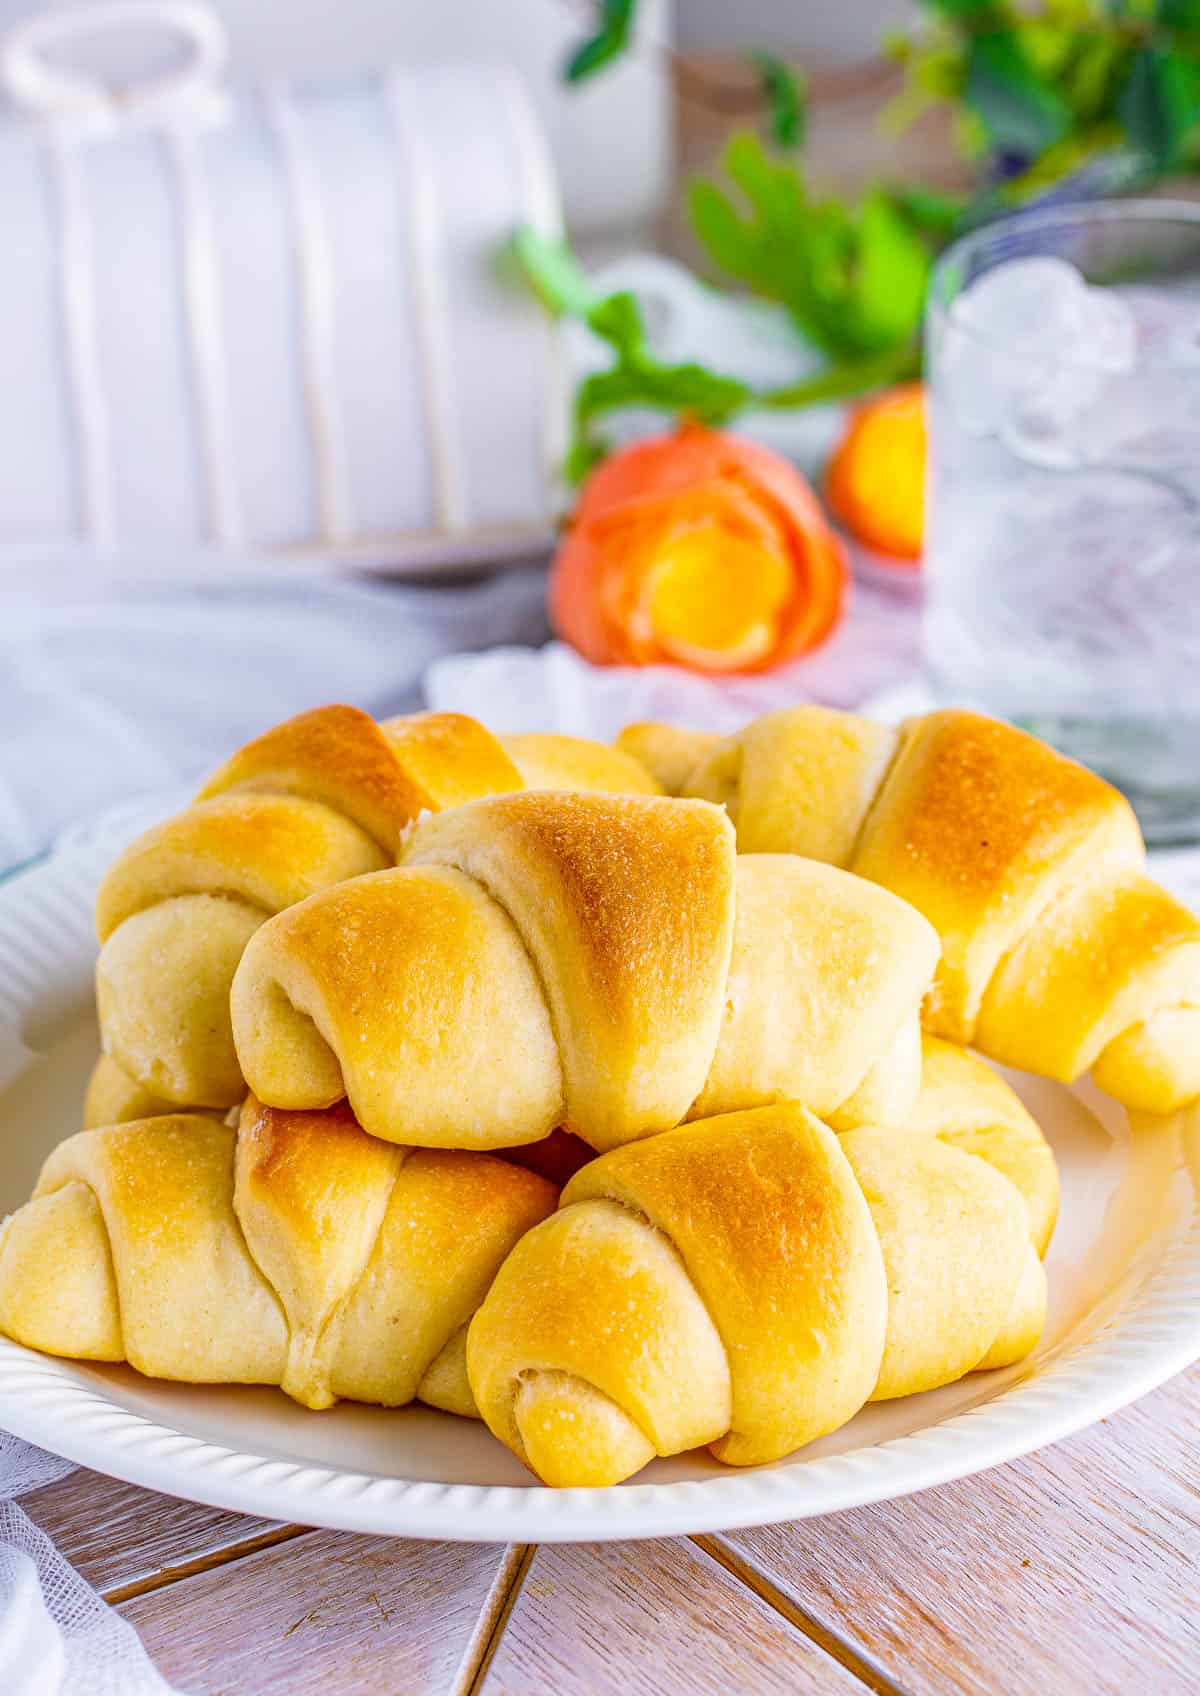 Crescent Rolls Recipe stacked on top of one another on white plate.